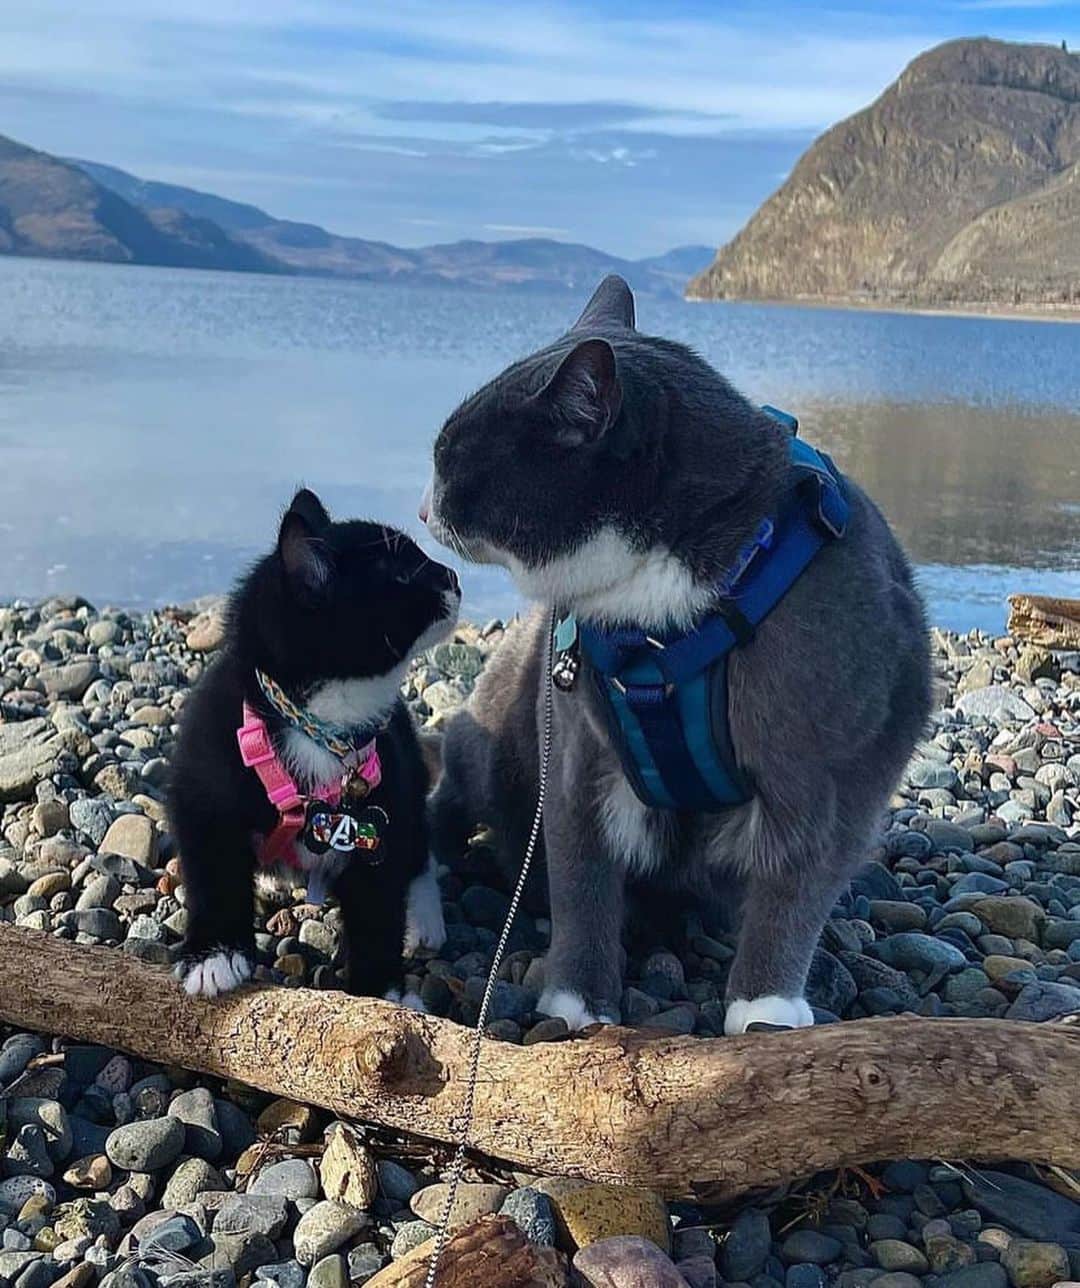 Bolt and Keelのインスタグラム：「Adventure kitty in training 🐾  Obi is doing a great job teaching his nephew Quill what the adventure life is all about!🏔  @adventrapets ➡️ @outdoorobi  —————————————————— Follow @adventrapets to meet cute, brave and inspiring adventure pets from all over the world! 🌲🐶🐱🌲  • TAG US IN YOUR POSTS to get your little adventurer featured! #adventrapets ——————————————————」